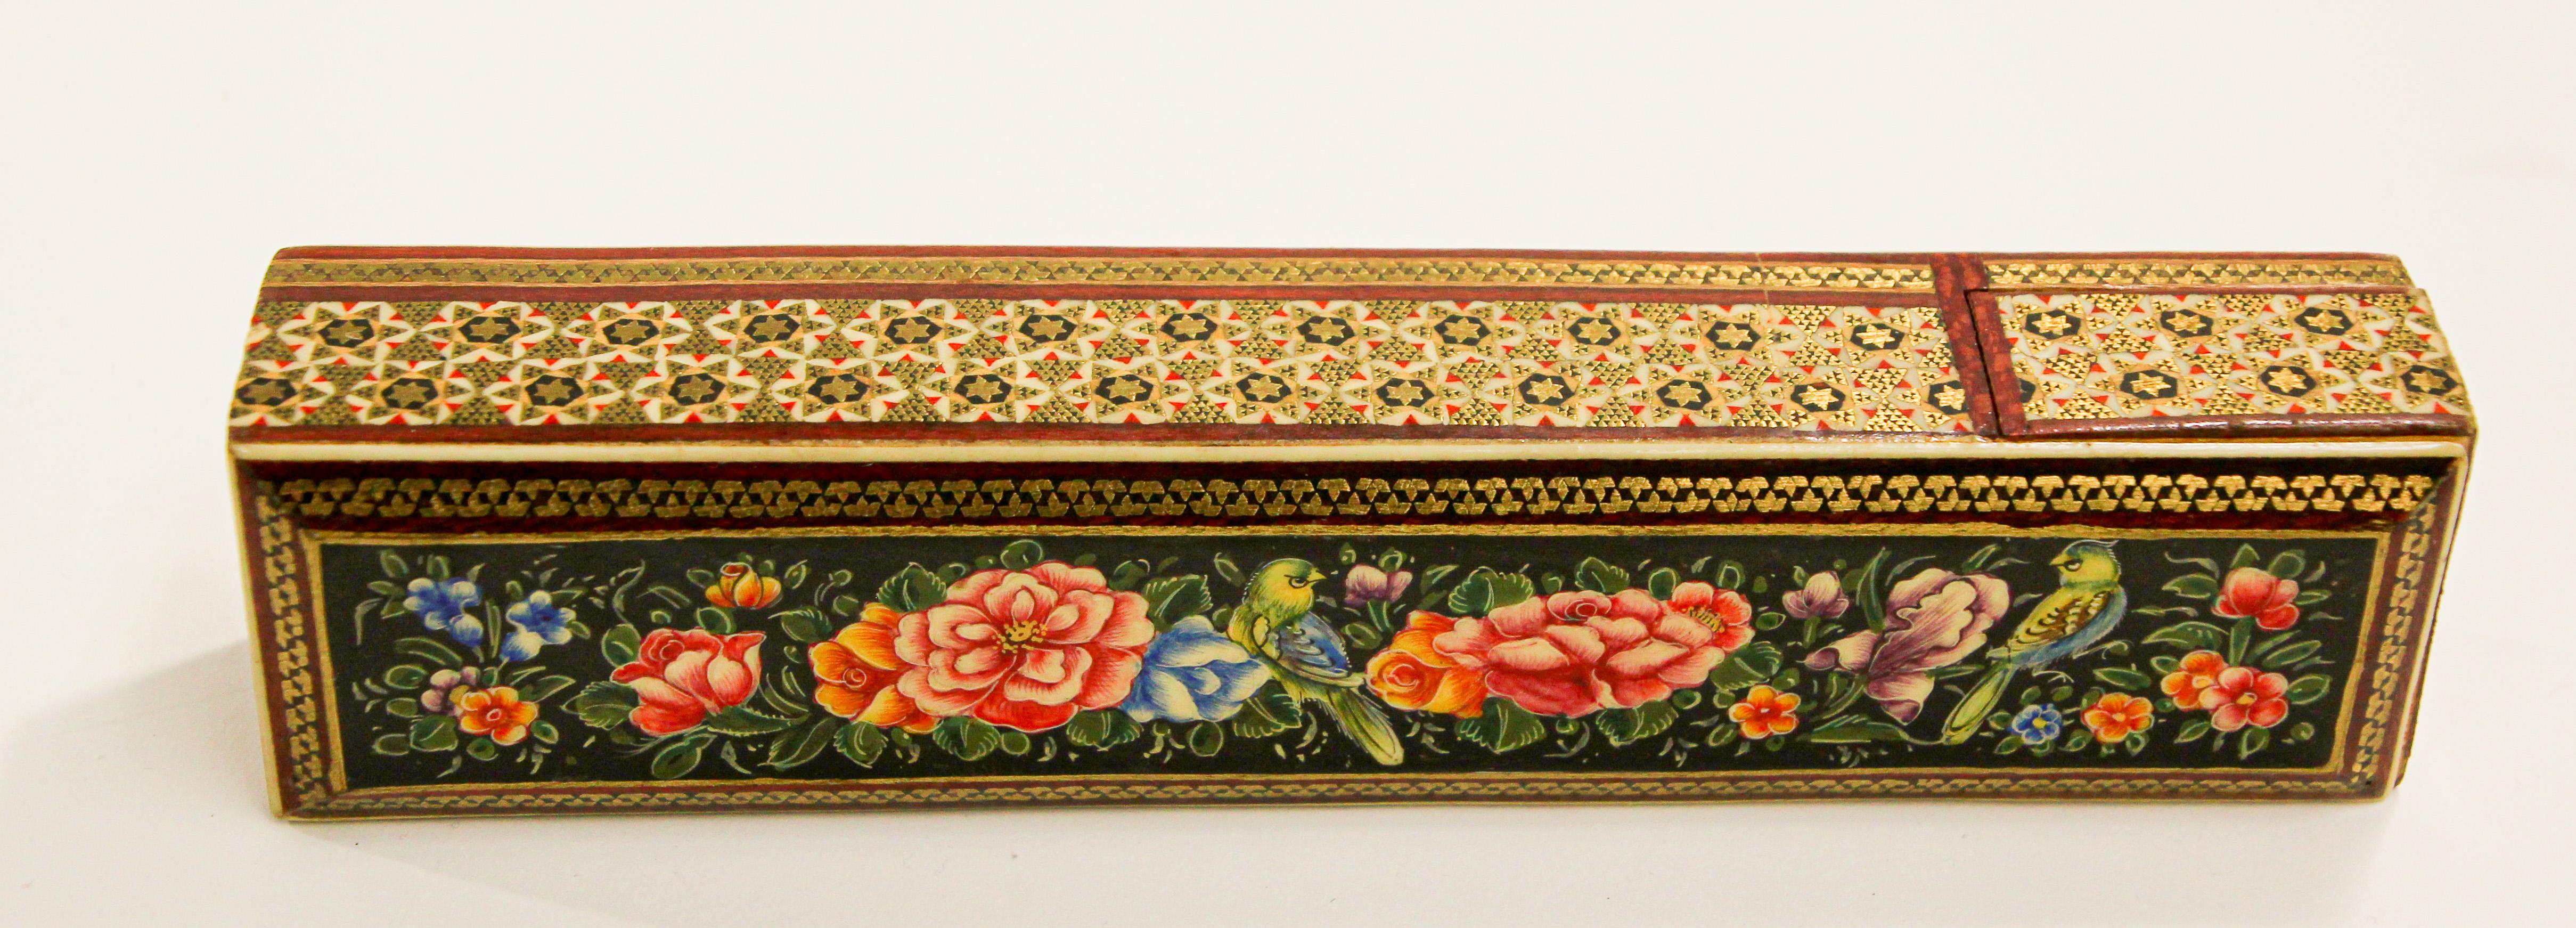 Moorish Persian Lacquer Pen Box Hand Painted with Floral Design